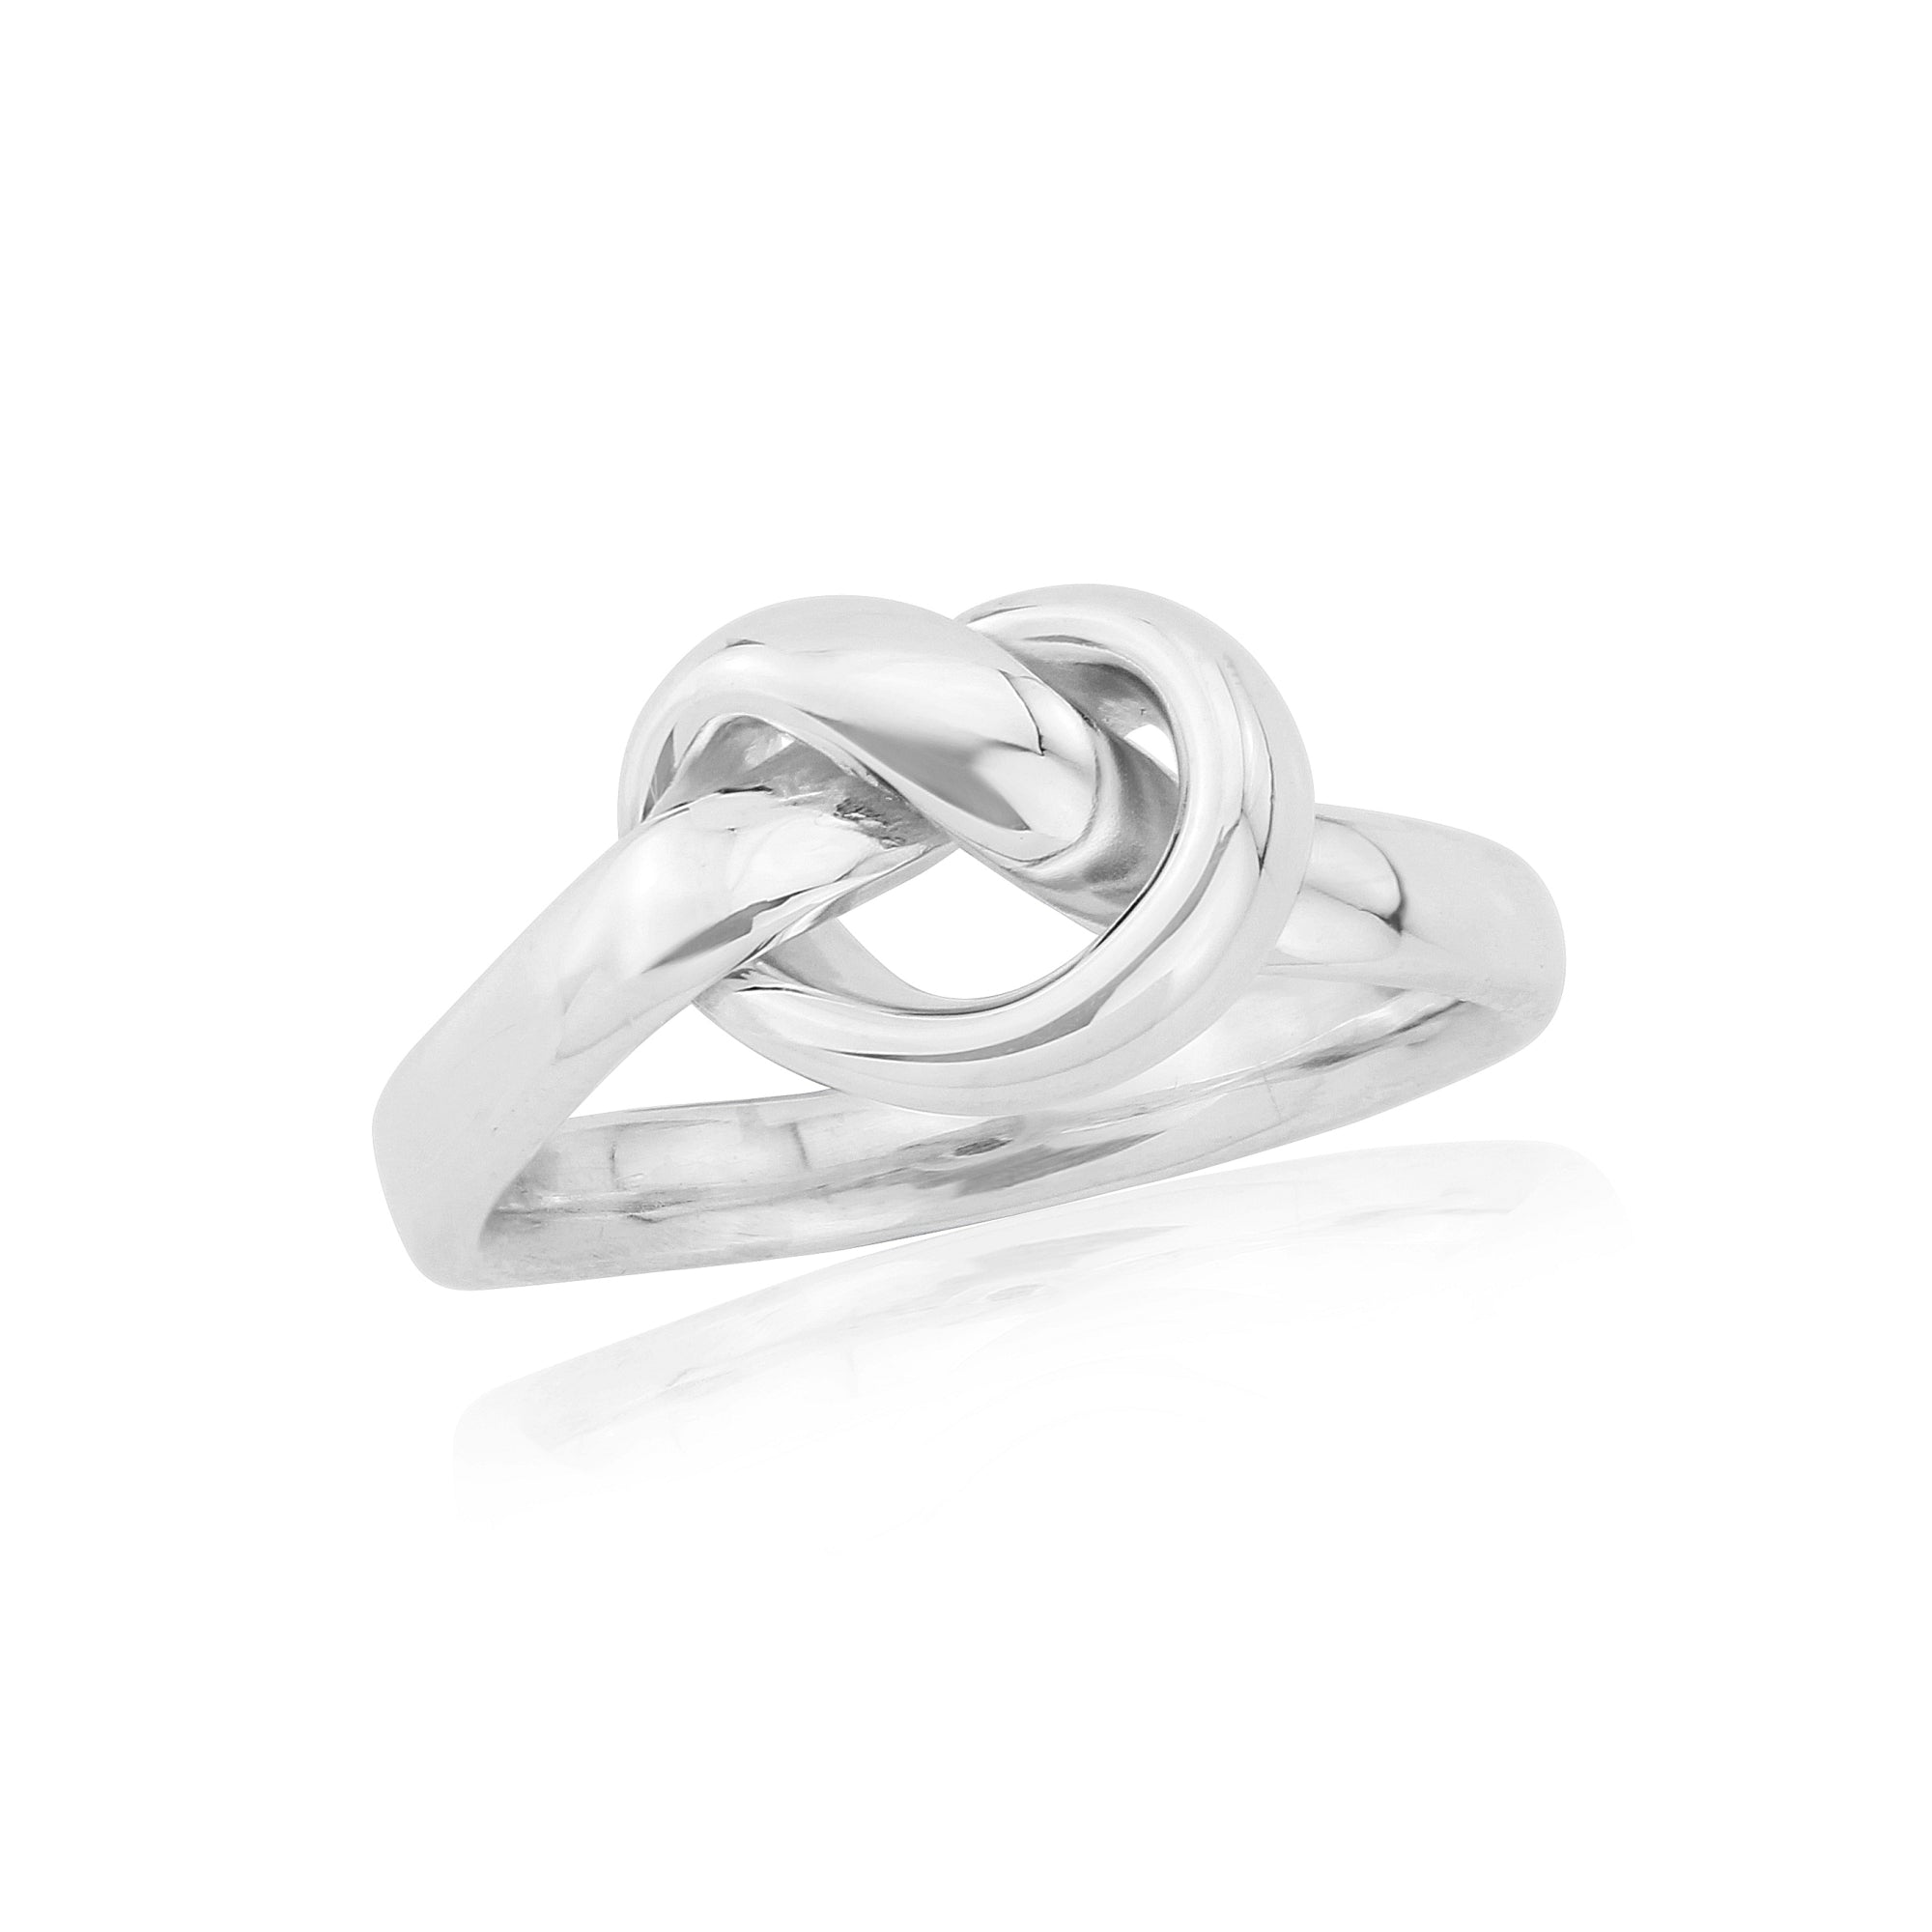 Silver Ring with Tight Knot detail